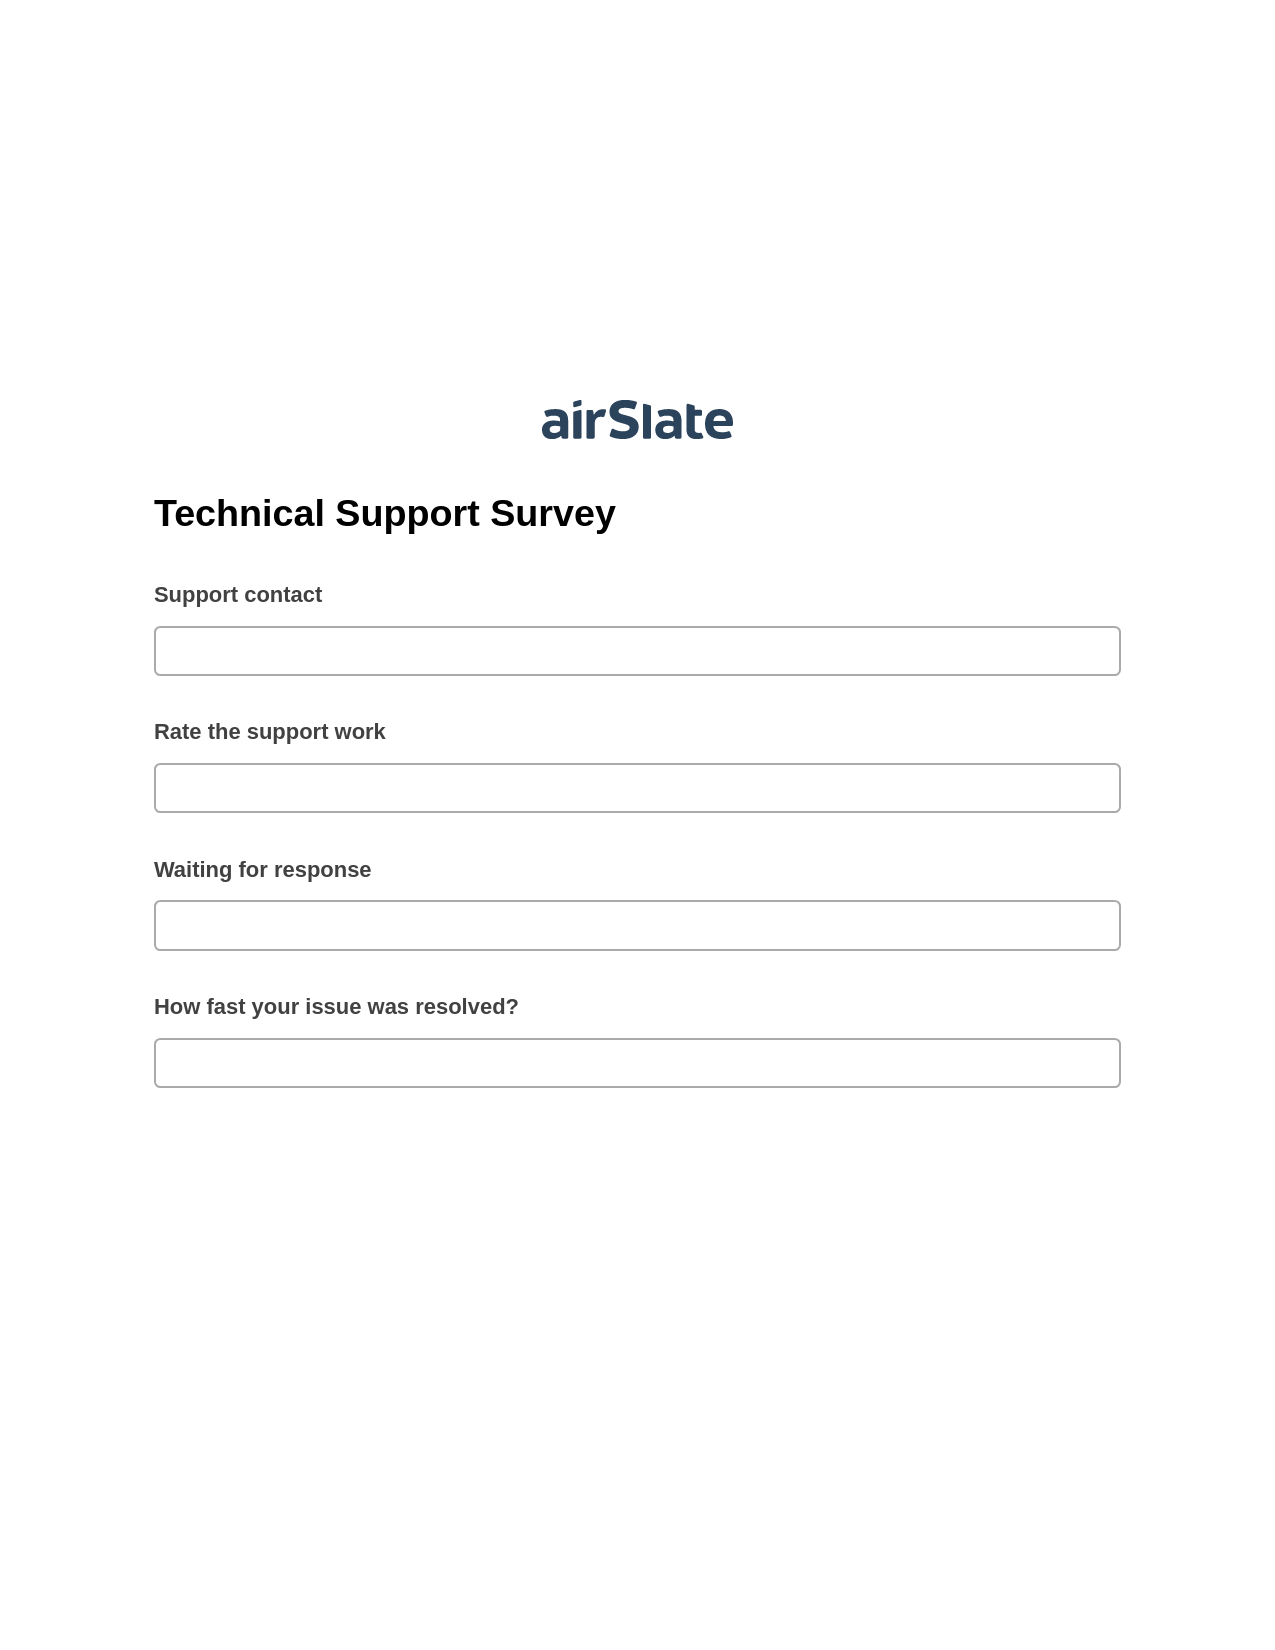 Technical Support Survey Pre-fill from another Slate Bot, Custom Field's Value Bot, Email Notification Postfinish Bot